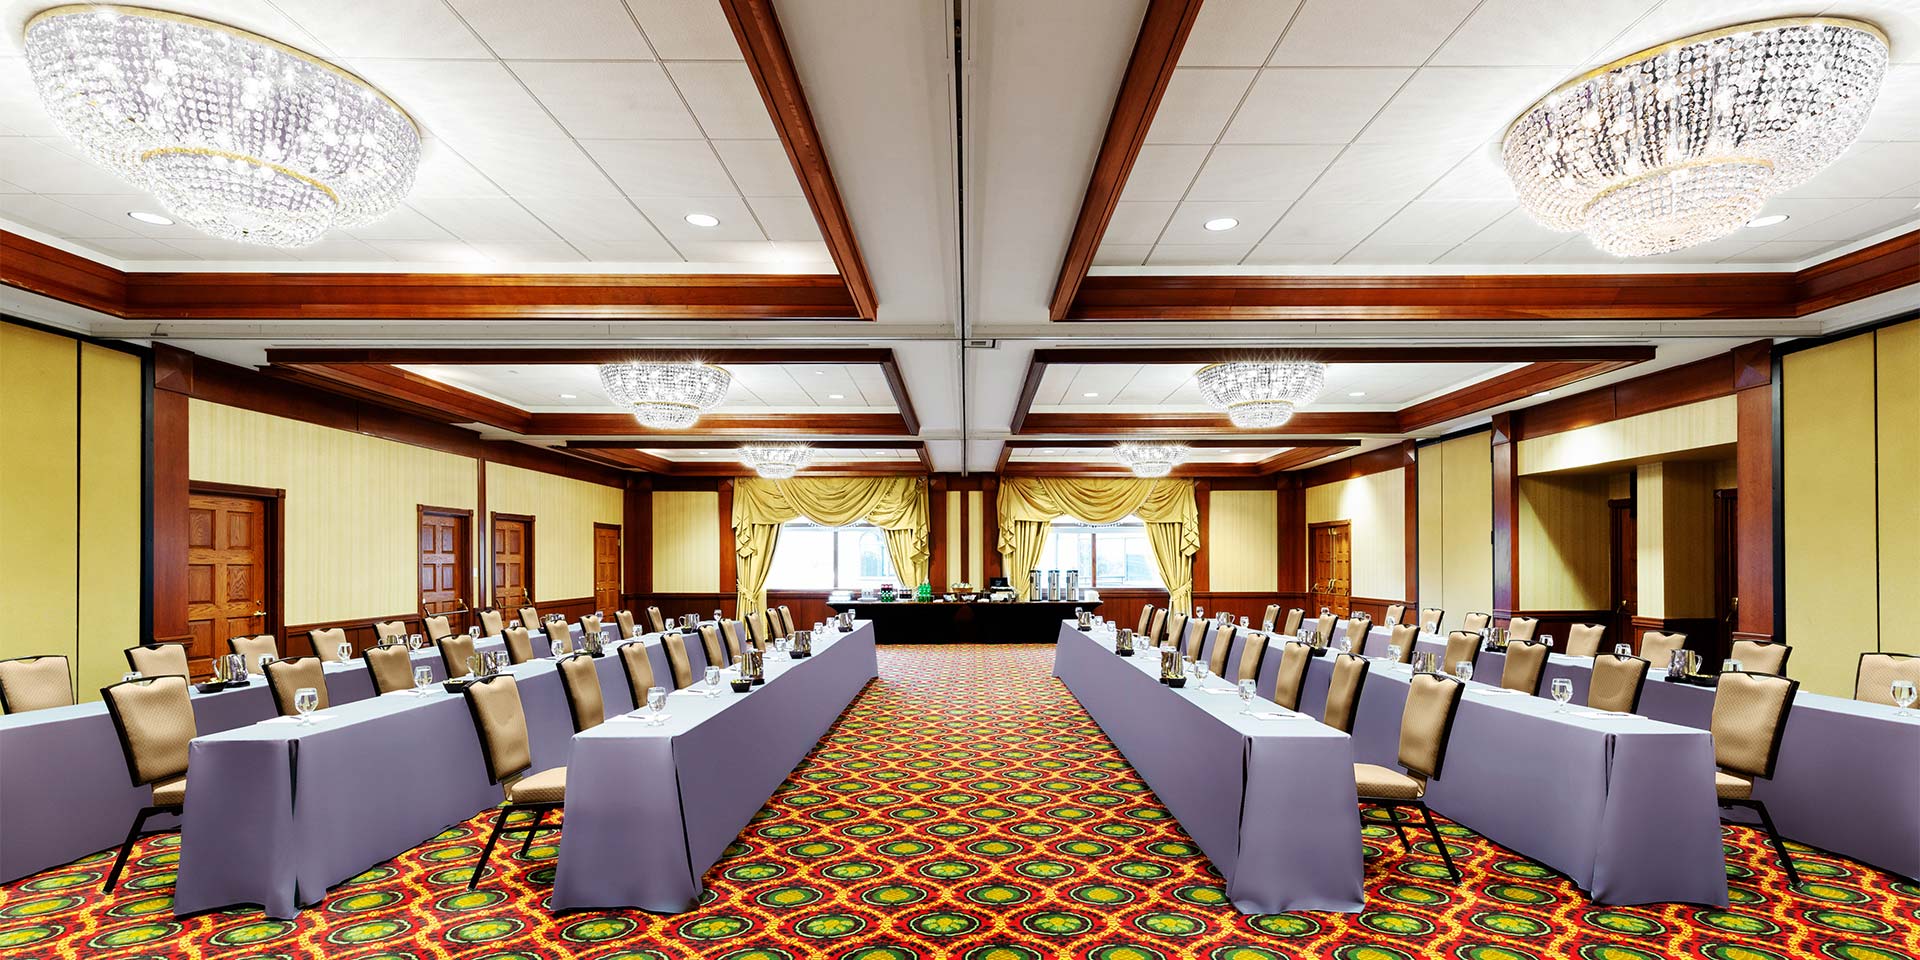 large conference style room with tables facing each other